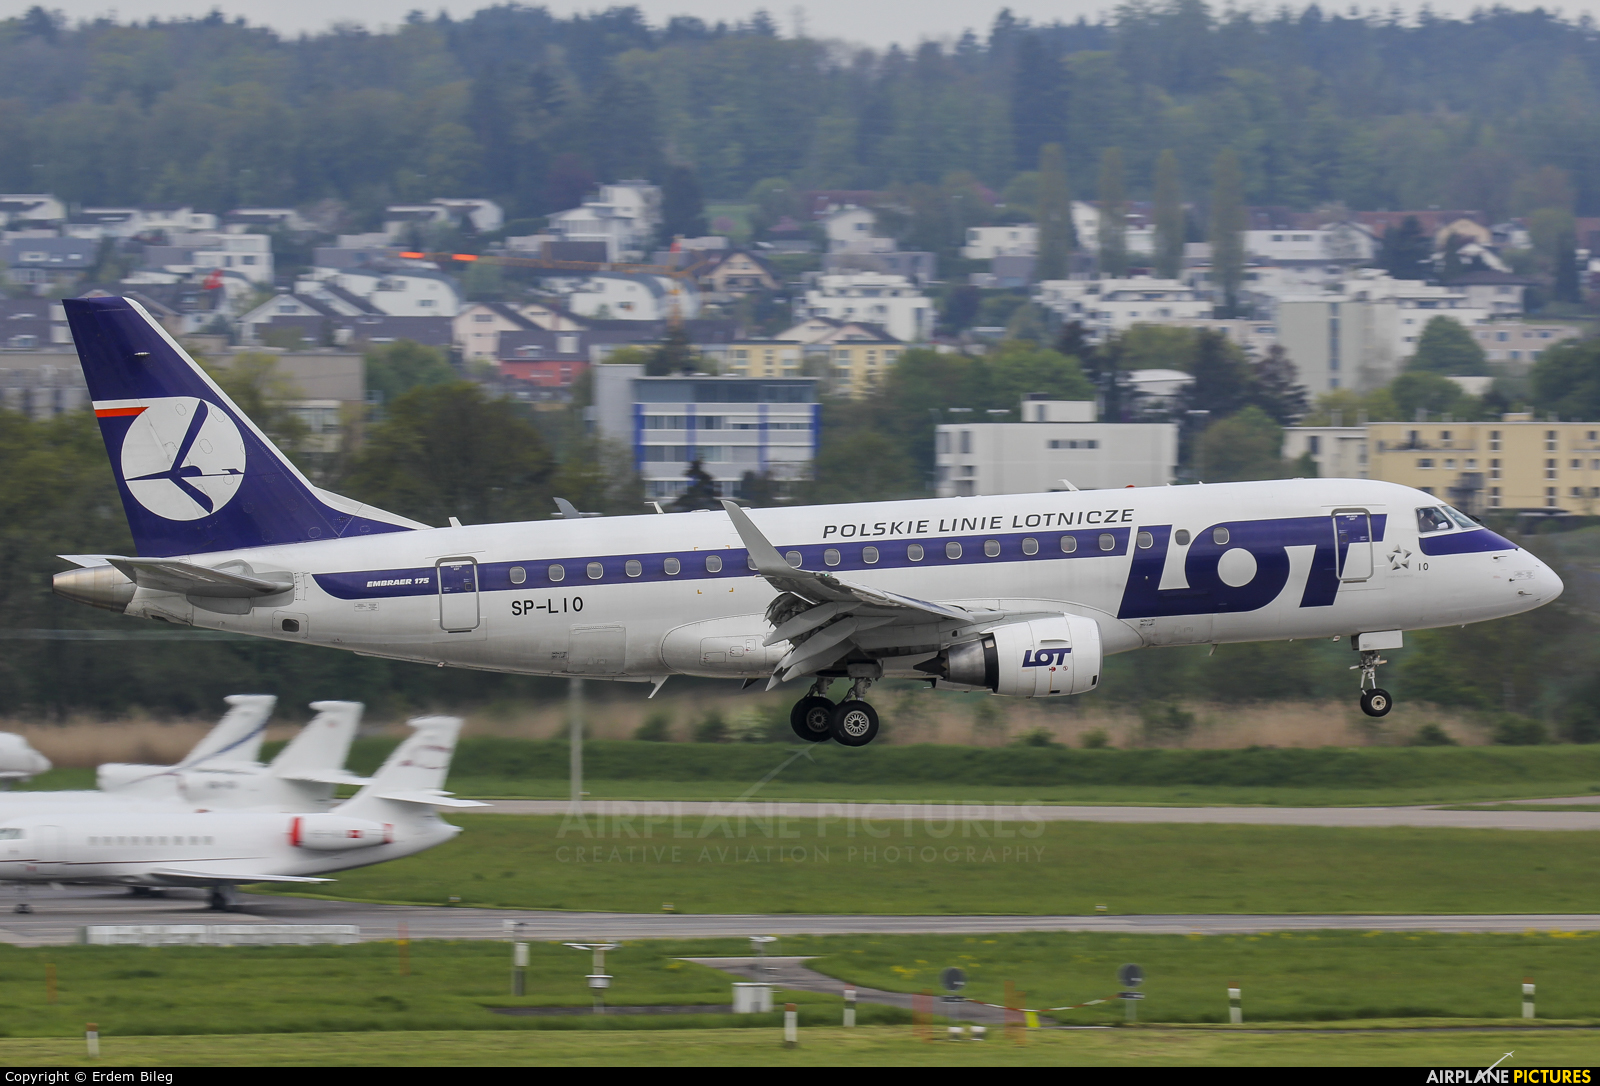 LOT - Polish Airlines SP-LIO aircraft at Zurich